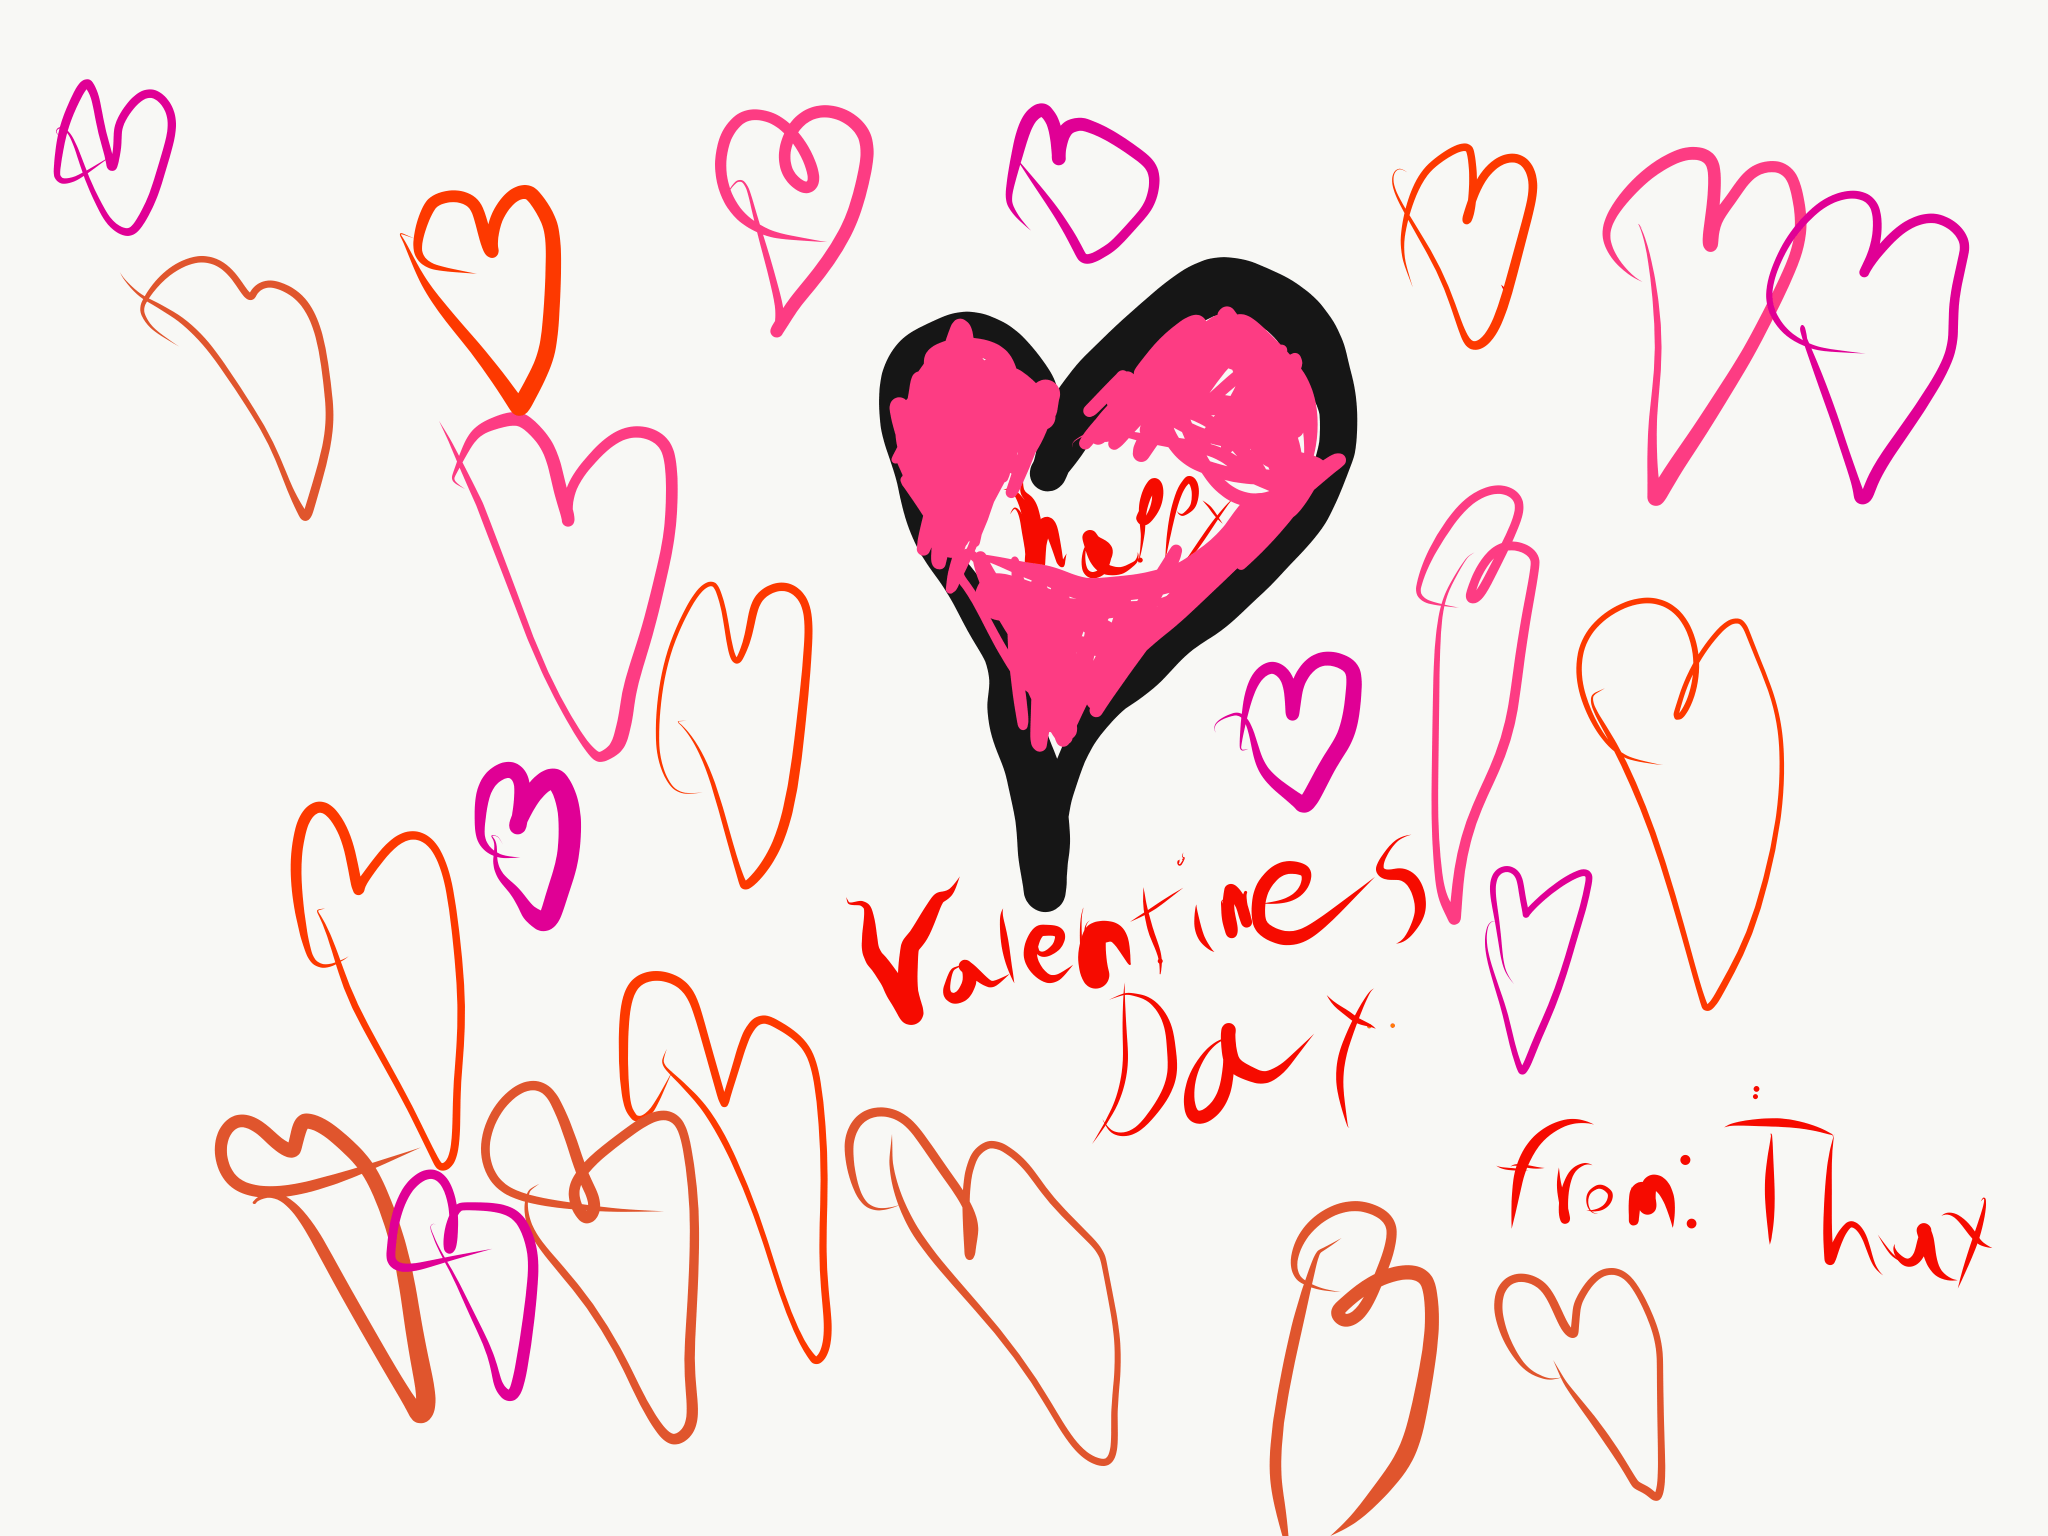 How Apple Pencil and Adobe Draw Saved Valentine's Day +